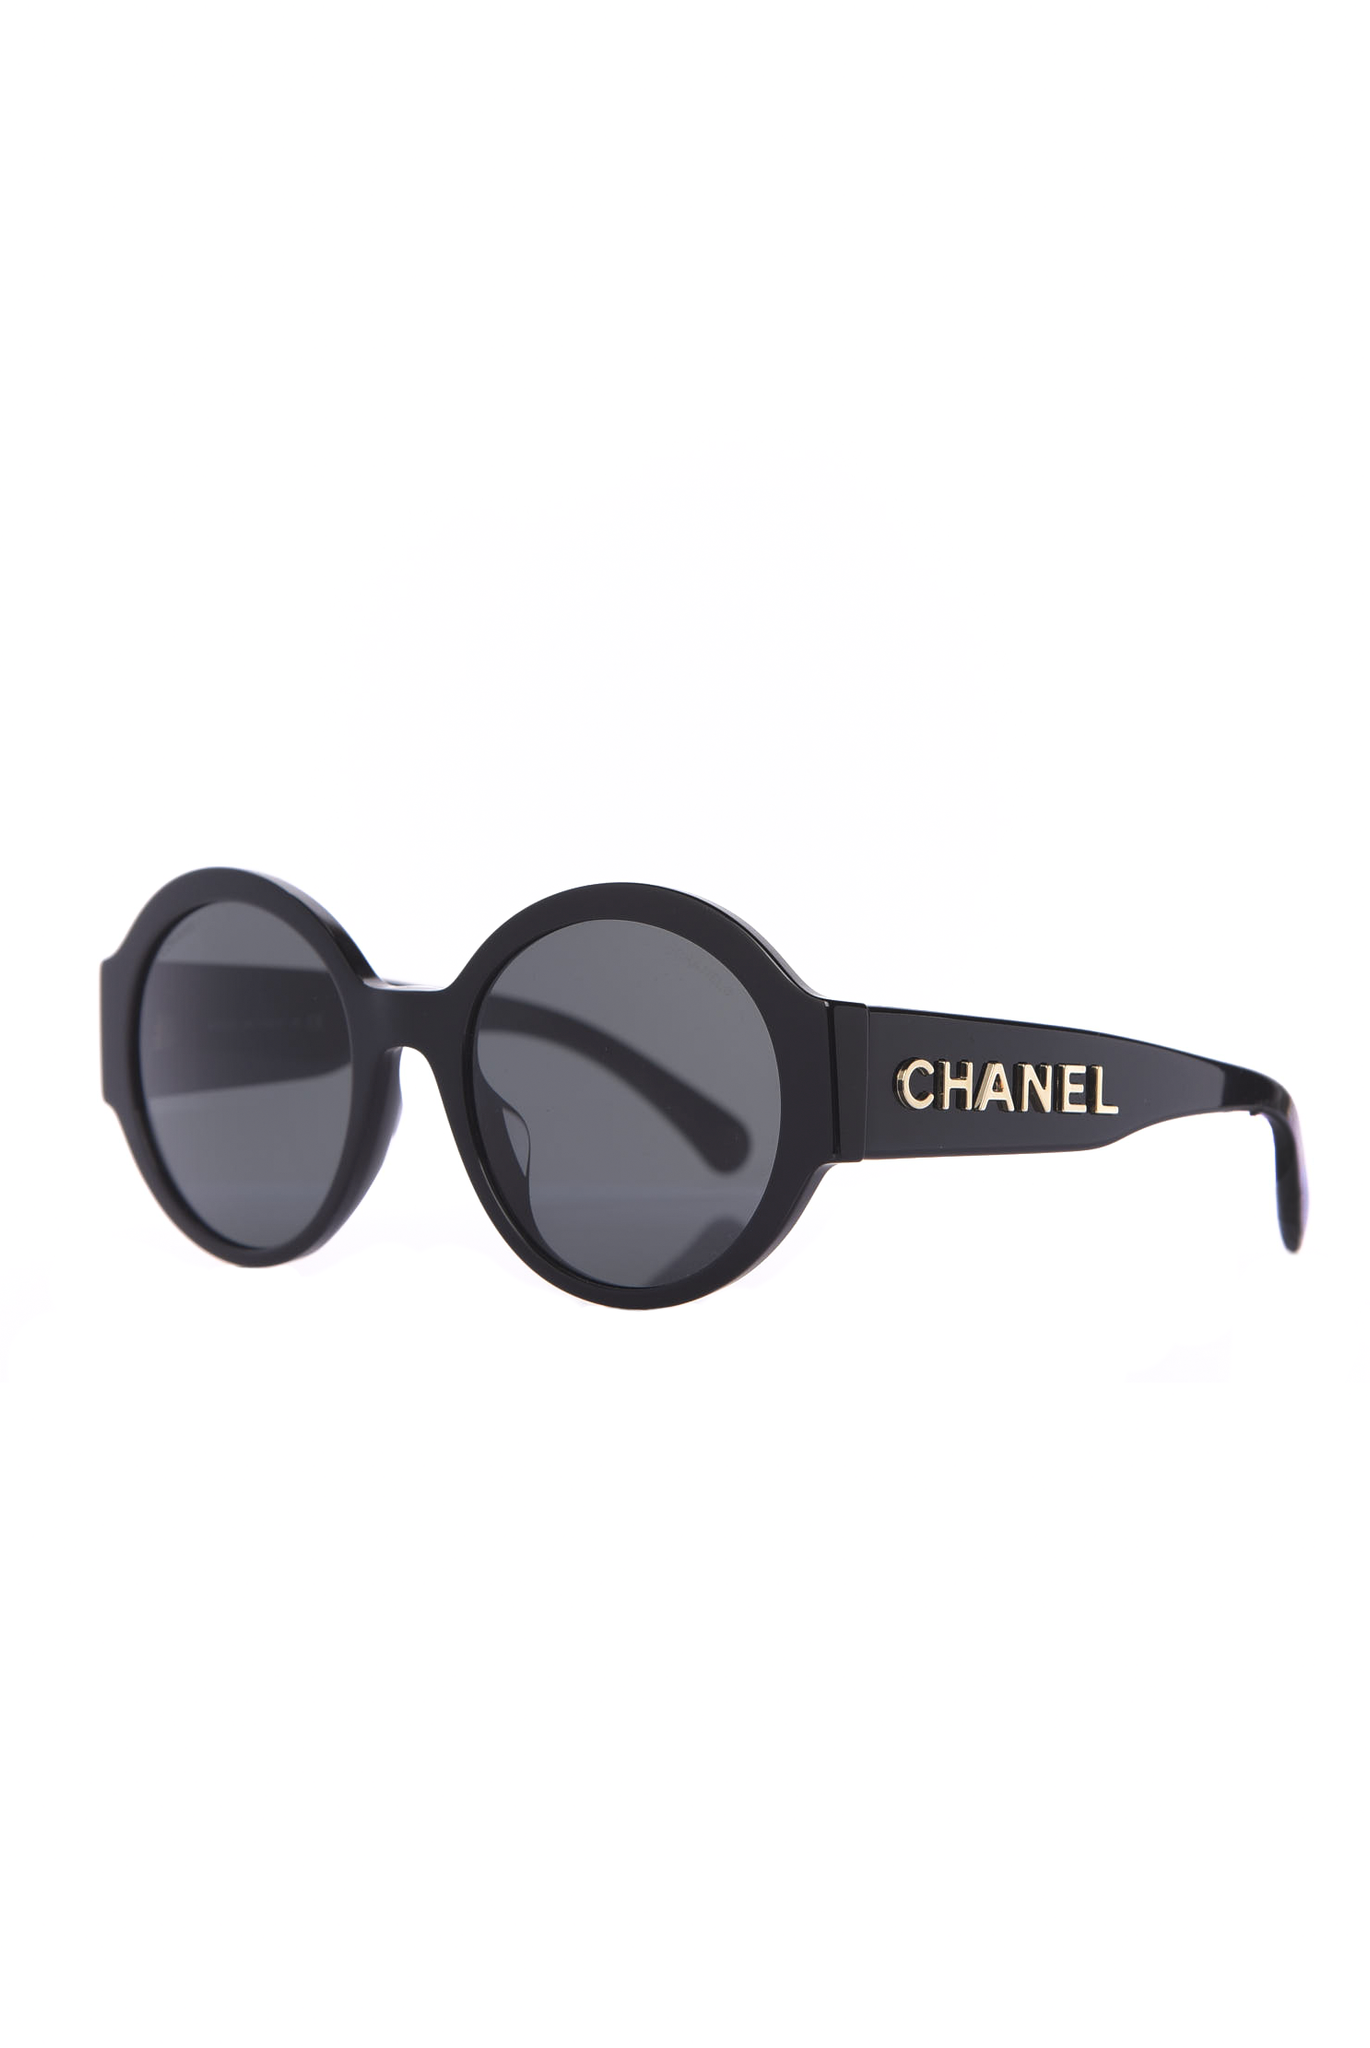 Chanel sunglasses with turquoise, gold and black square frames and